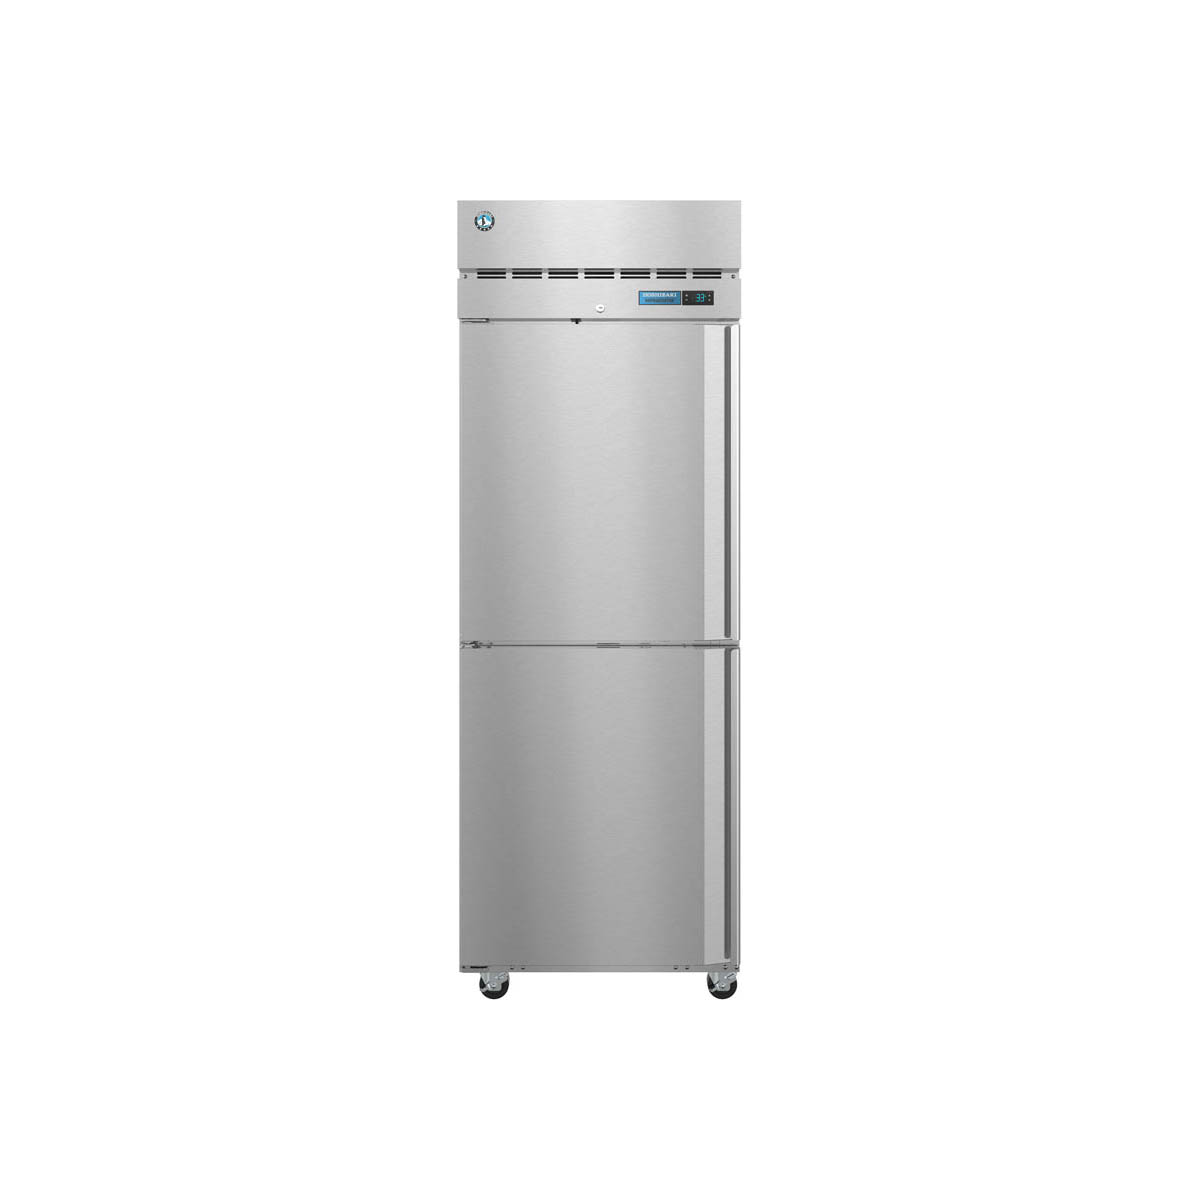 Hoshizaki R1A-HSL 27“ 1-Section Half Solid Door Reach-In Refrigerator, Left Hinged - 23.1 cu. ft.